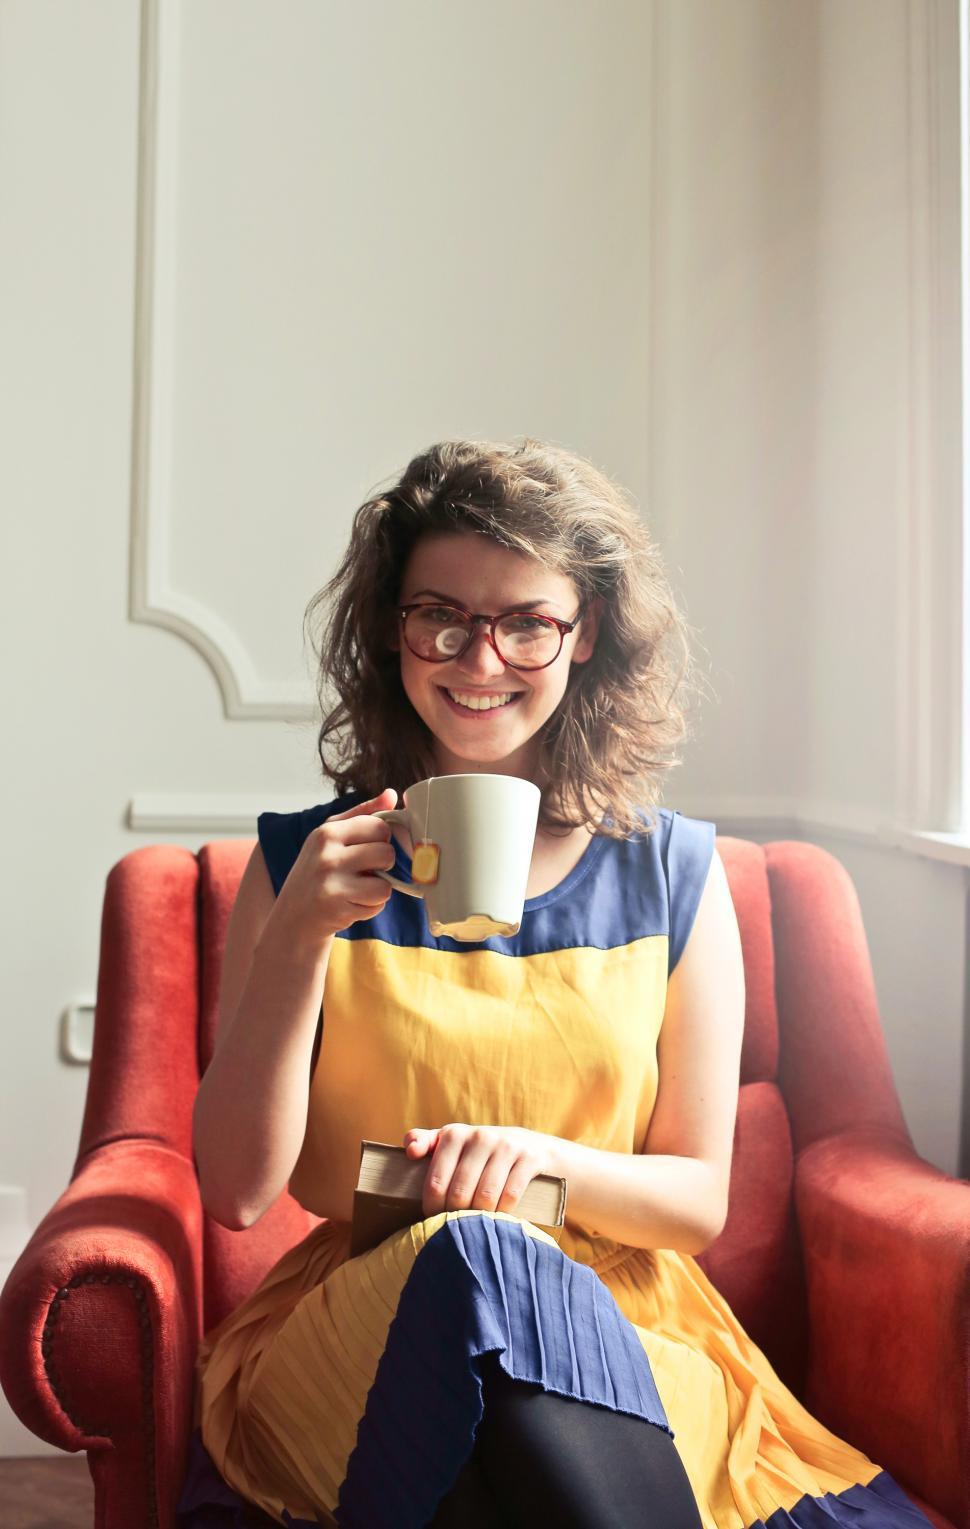 Free Image of Young Woman Sitting On Red Armchair While Enjoying A Cup Of Tea 